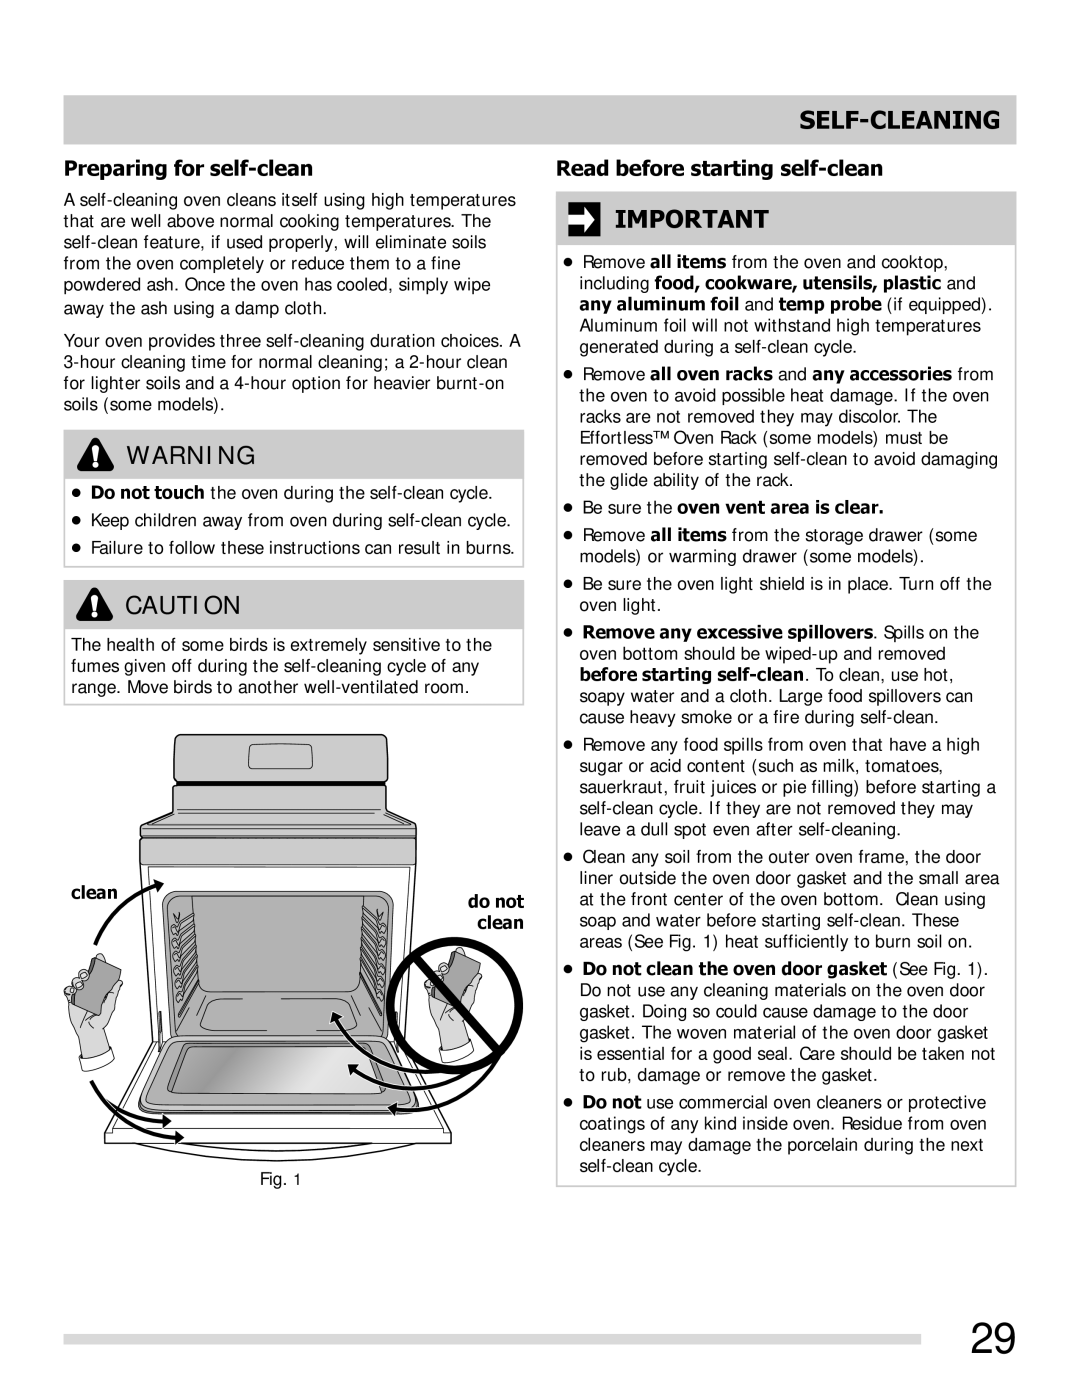 Frigidaire FGGF3054MB, FGGF3054MF, FGGF3054MW Self-Cleaning, Preparing for self-clean, Read before starting self-clean 